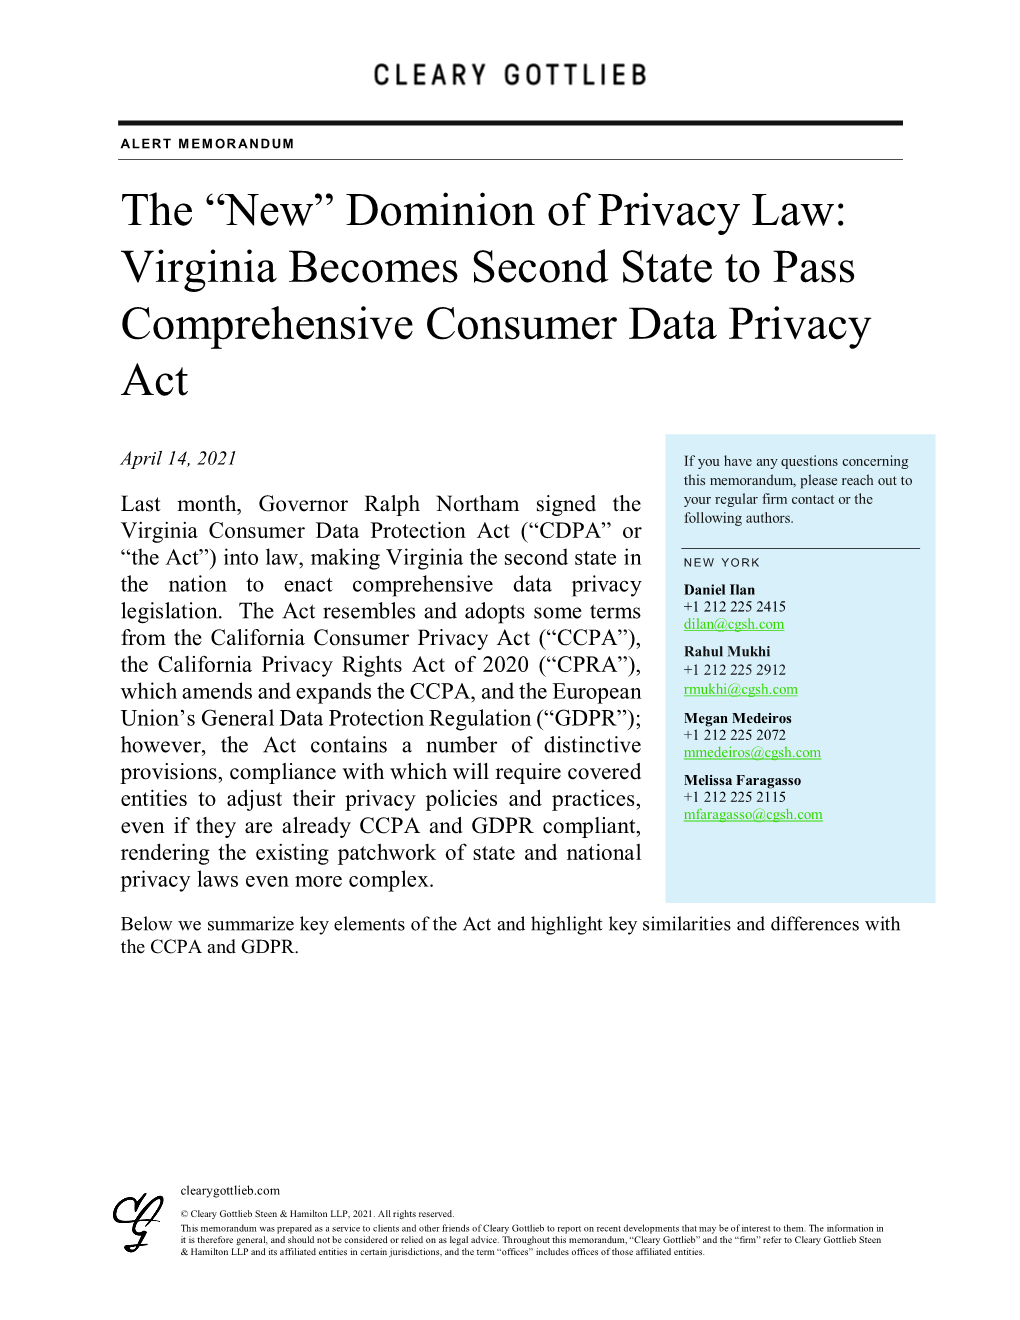 The “New” Dominion of Privacy Law: Virginia Becomes Second State to Pass Comprehensive Consumer Data Privacy Act